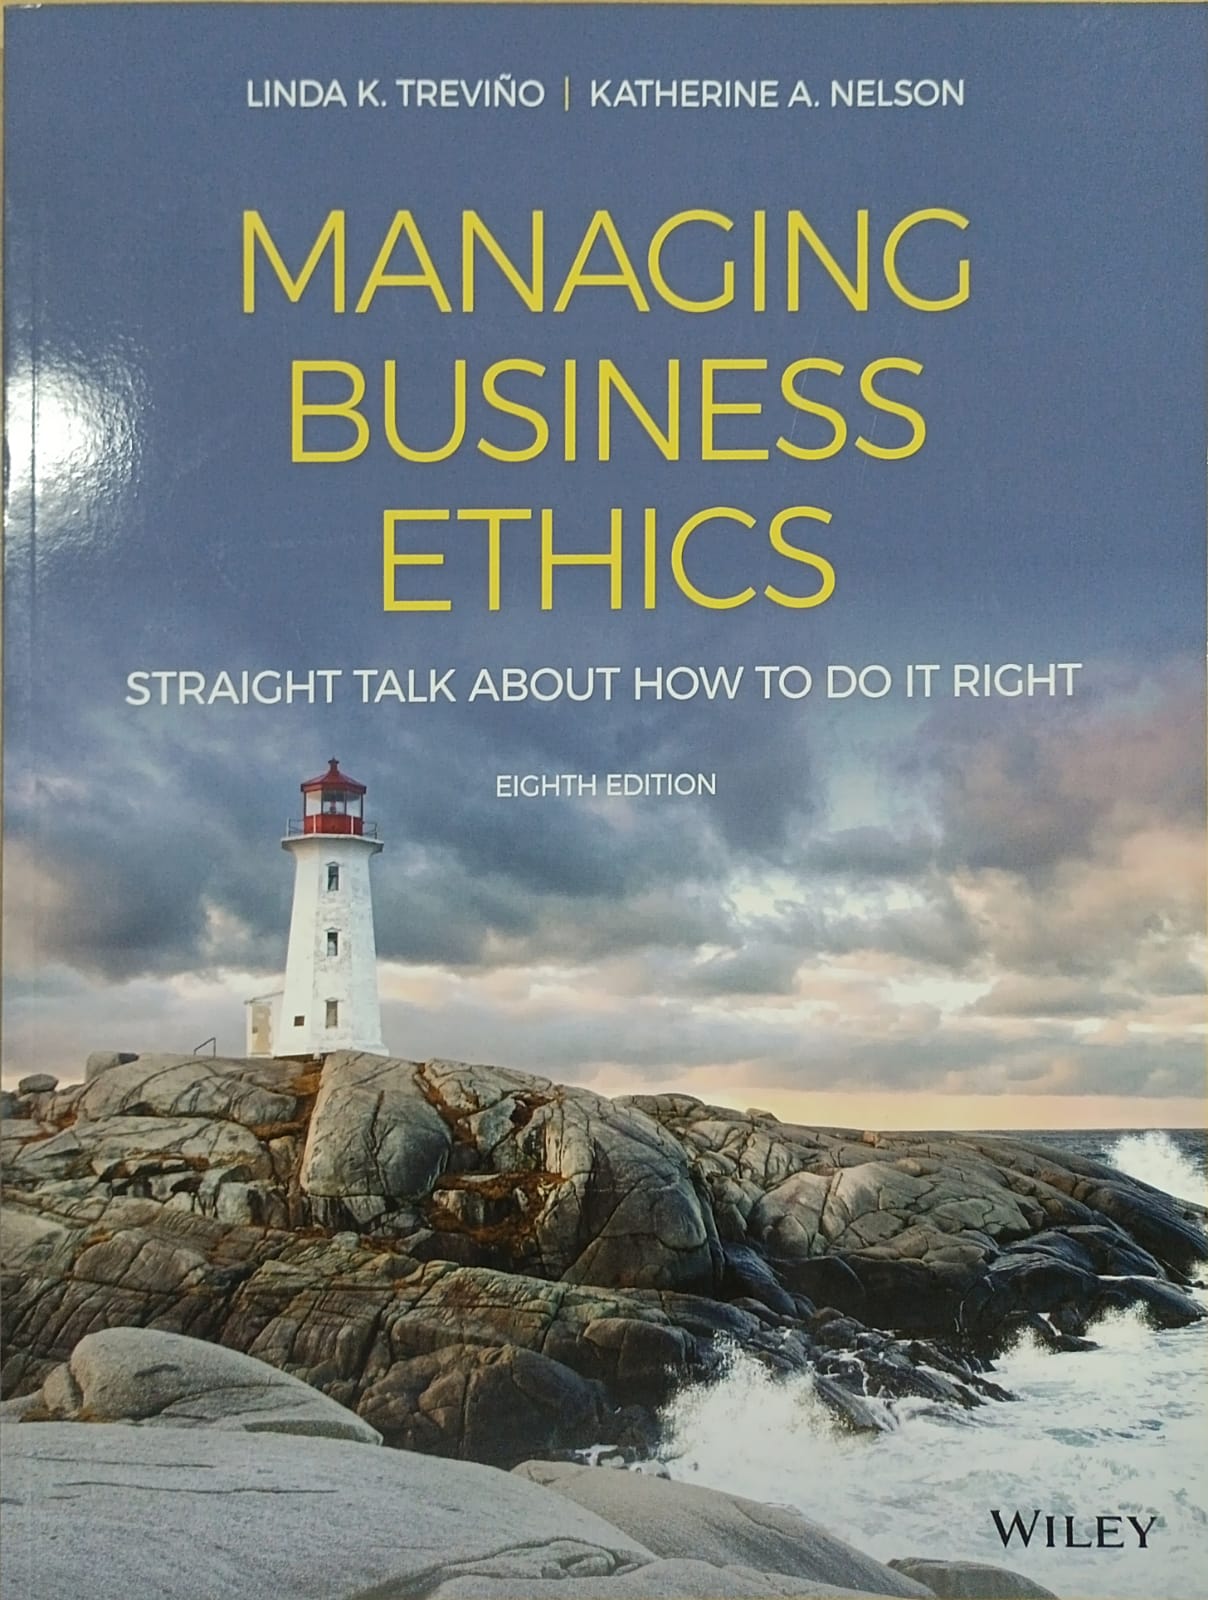 Managing business ethics: straight talk about how to do it right 8th edition